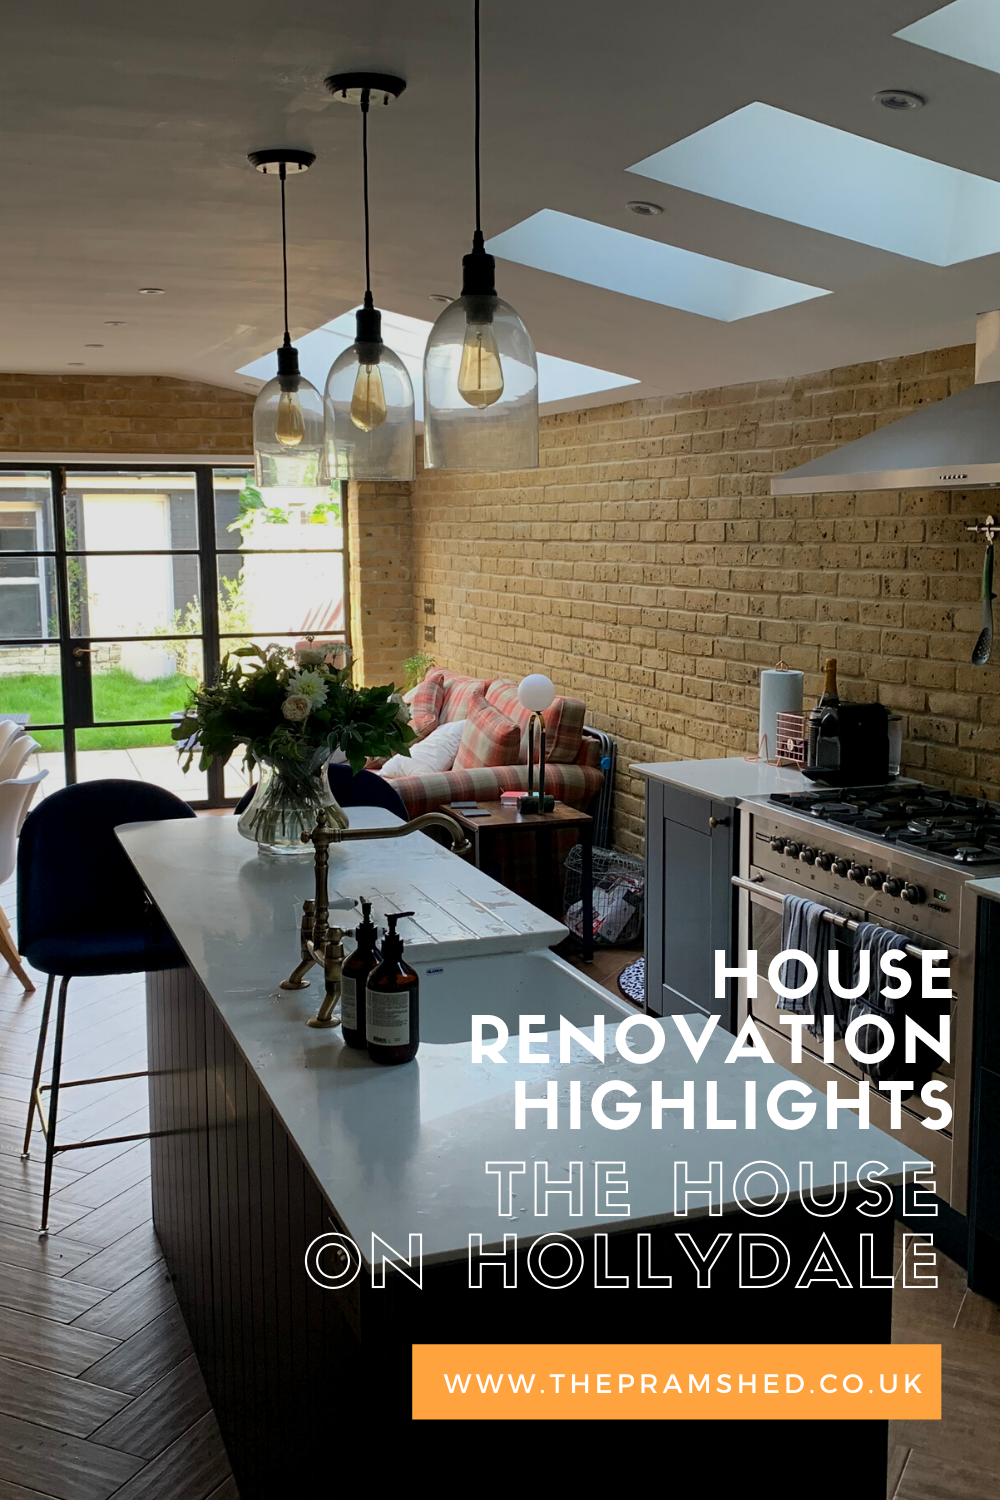 House Renovation Highlights featuring The House on Hollydale